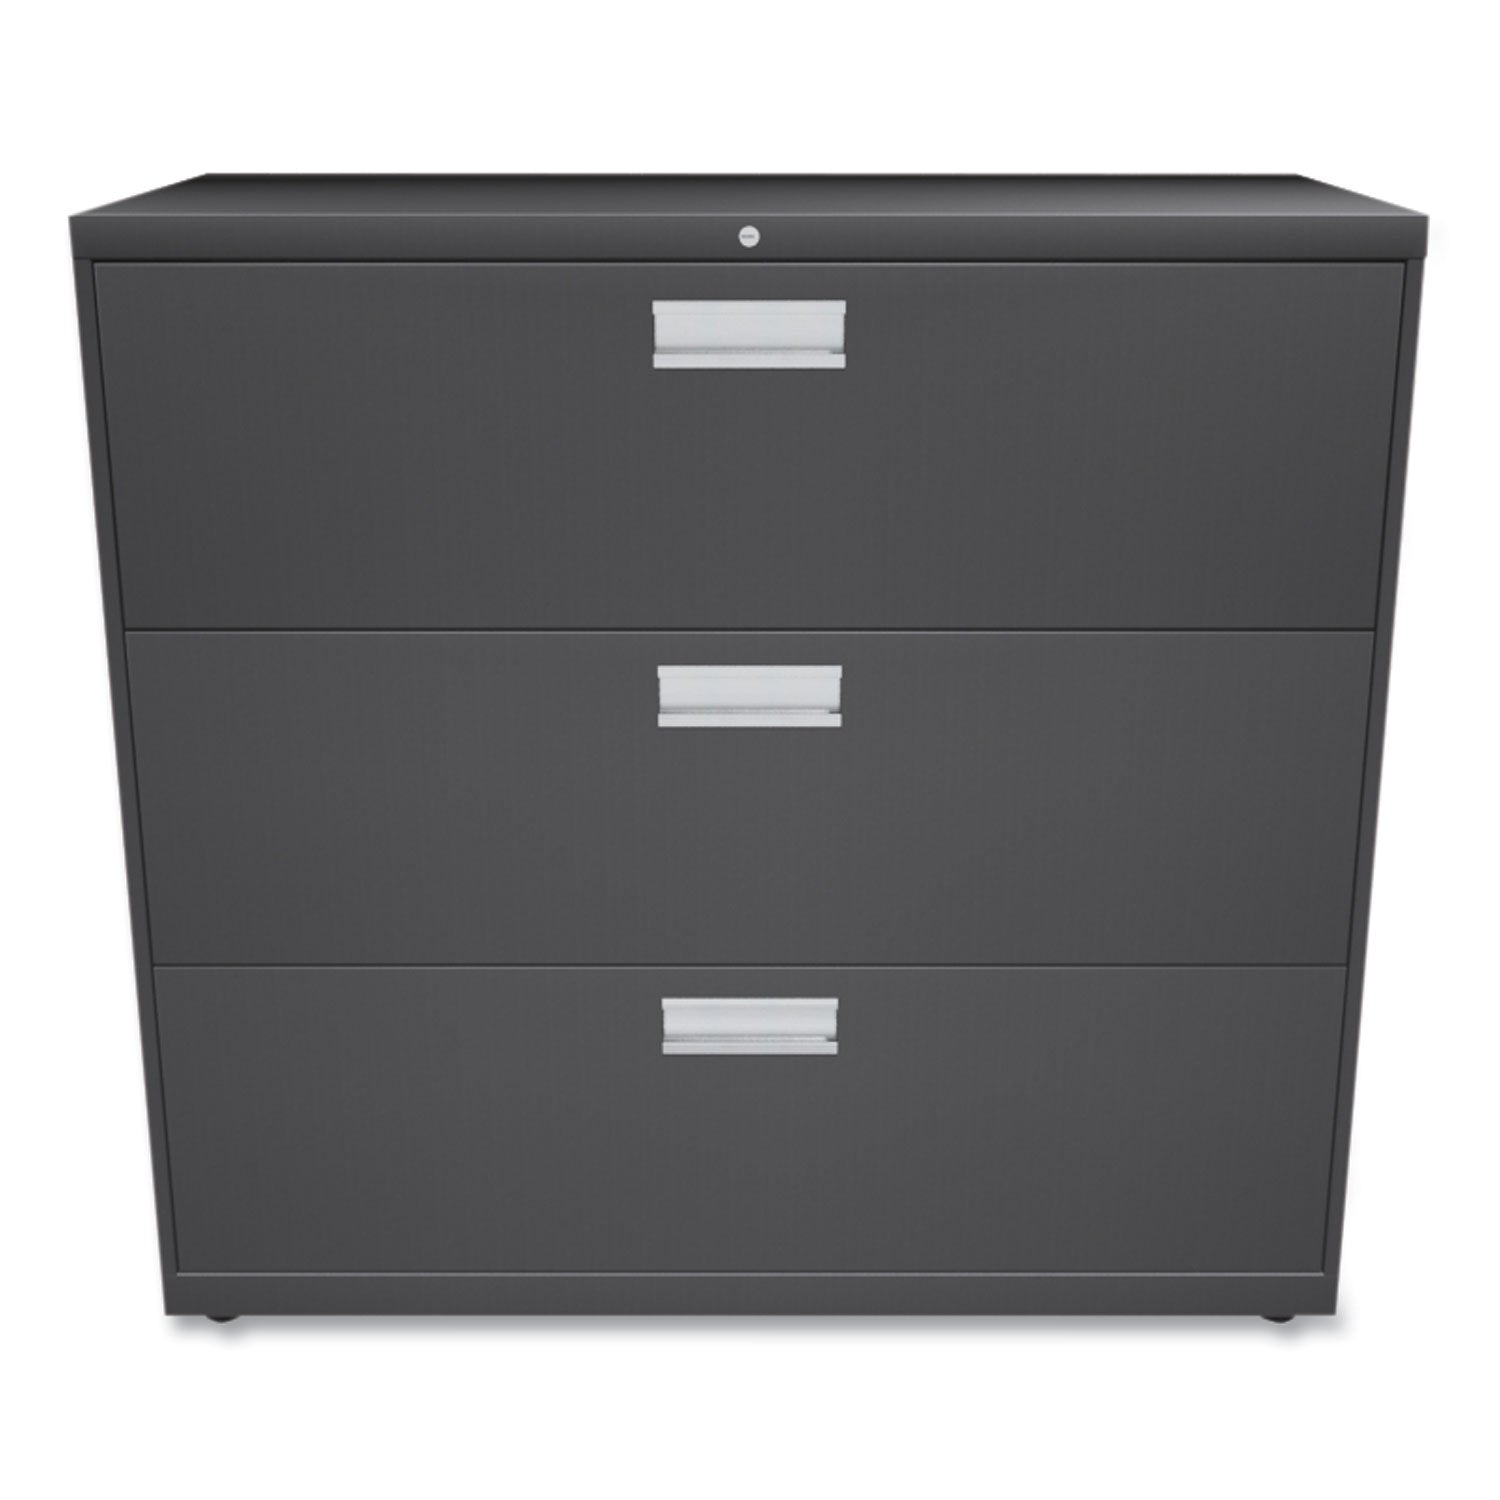 Brigade 600 Series Lateral File, 3 Legal/Letter-Size File Drawers, Charcoal, 42" x 18" x 39.13 - 